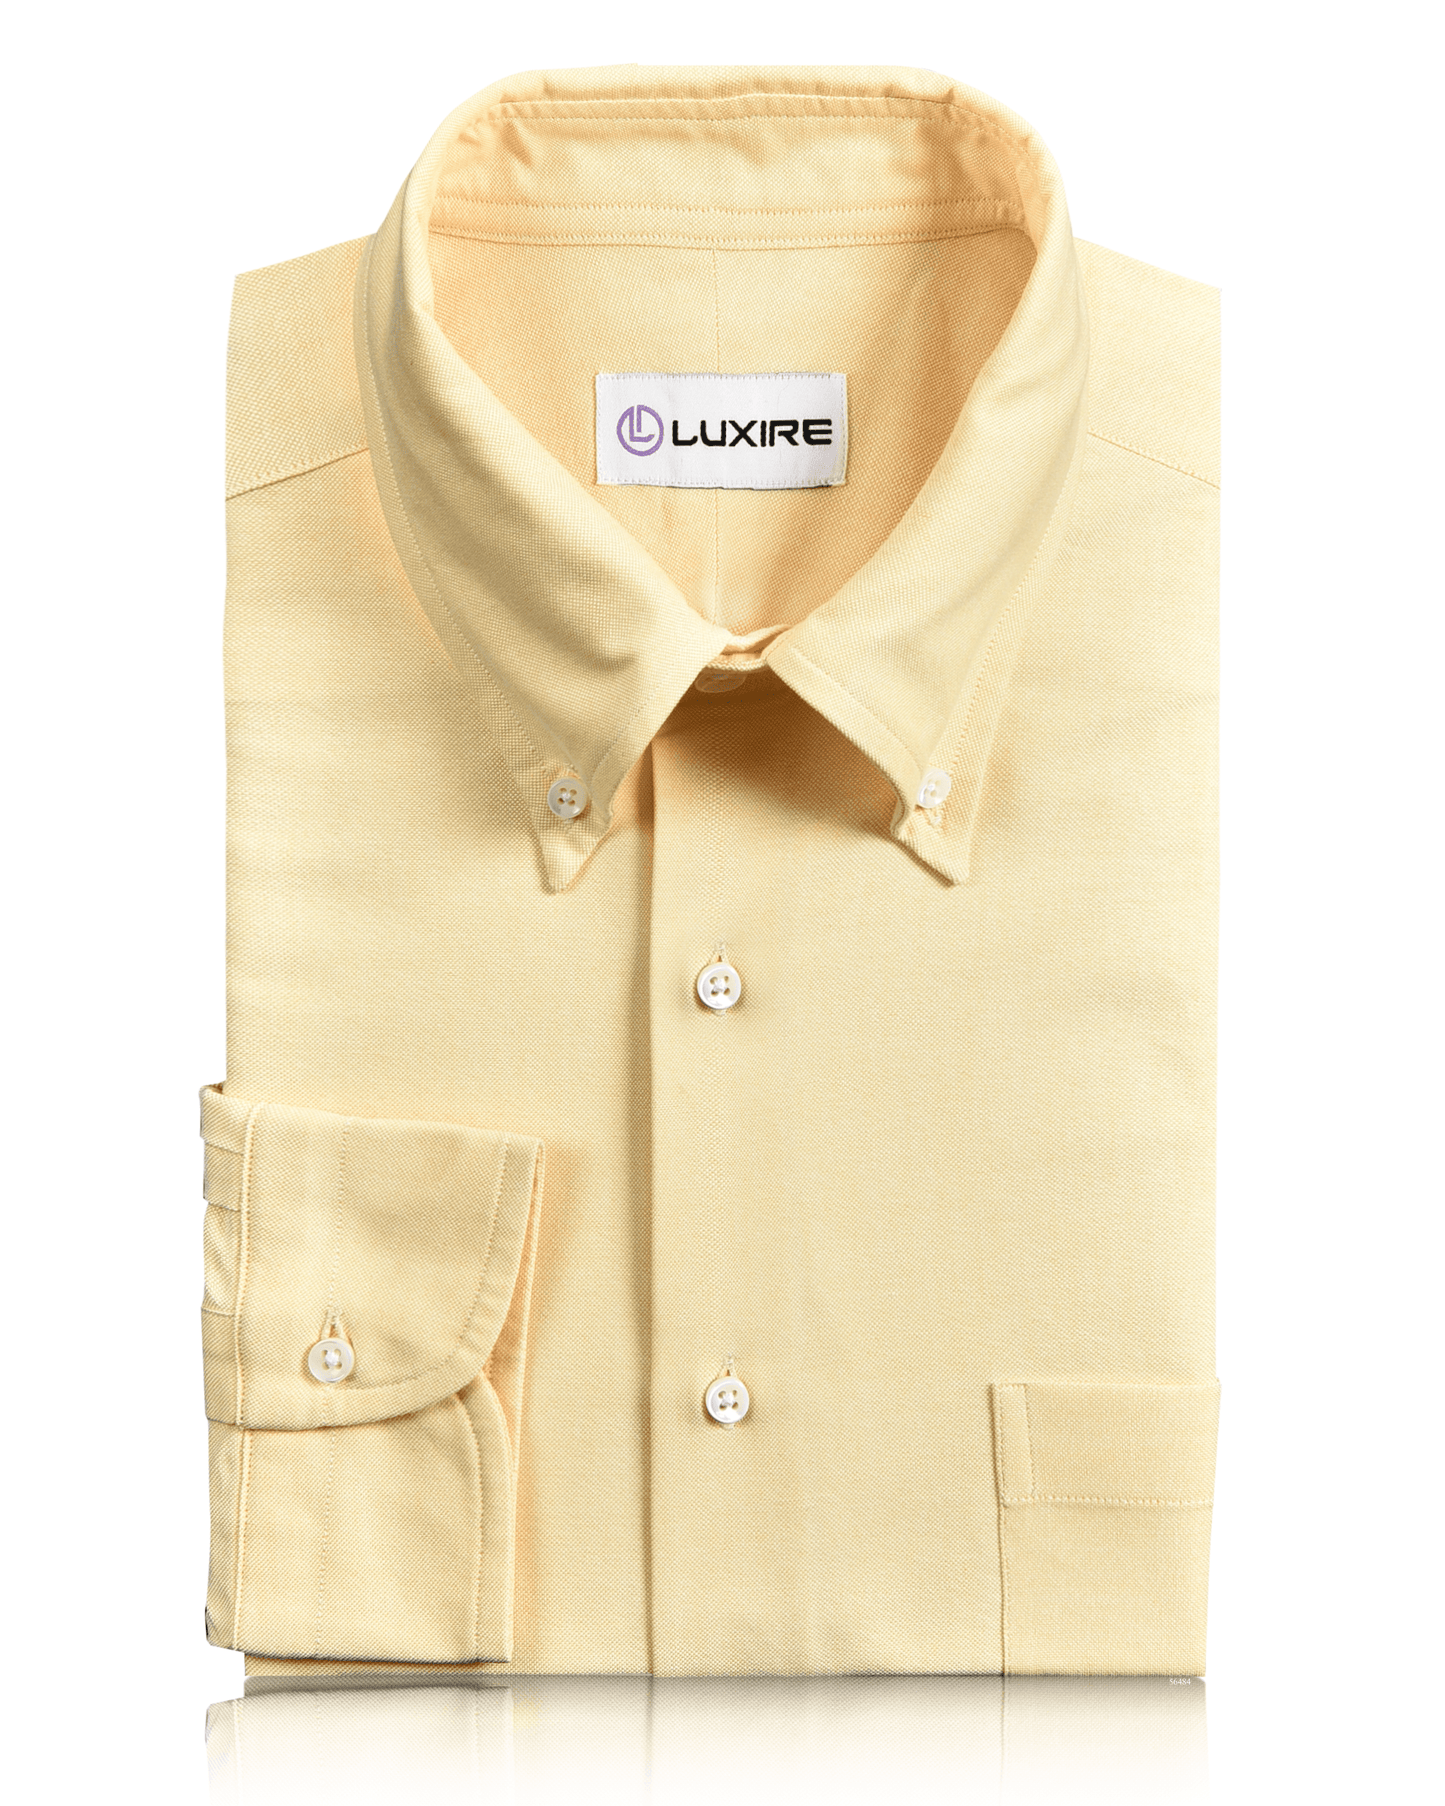 Front of the custom oxford shirt for men by Luxire in dark yellow